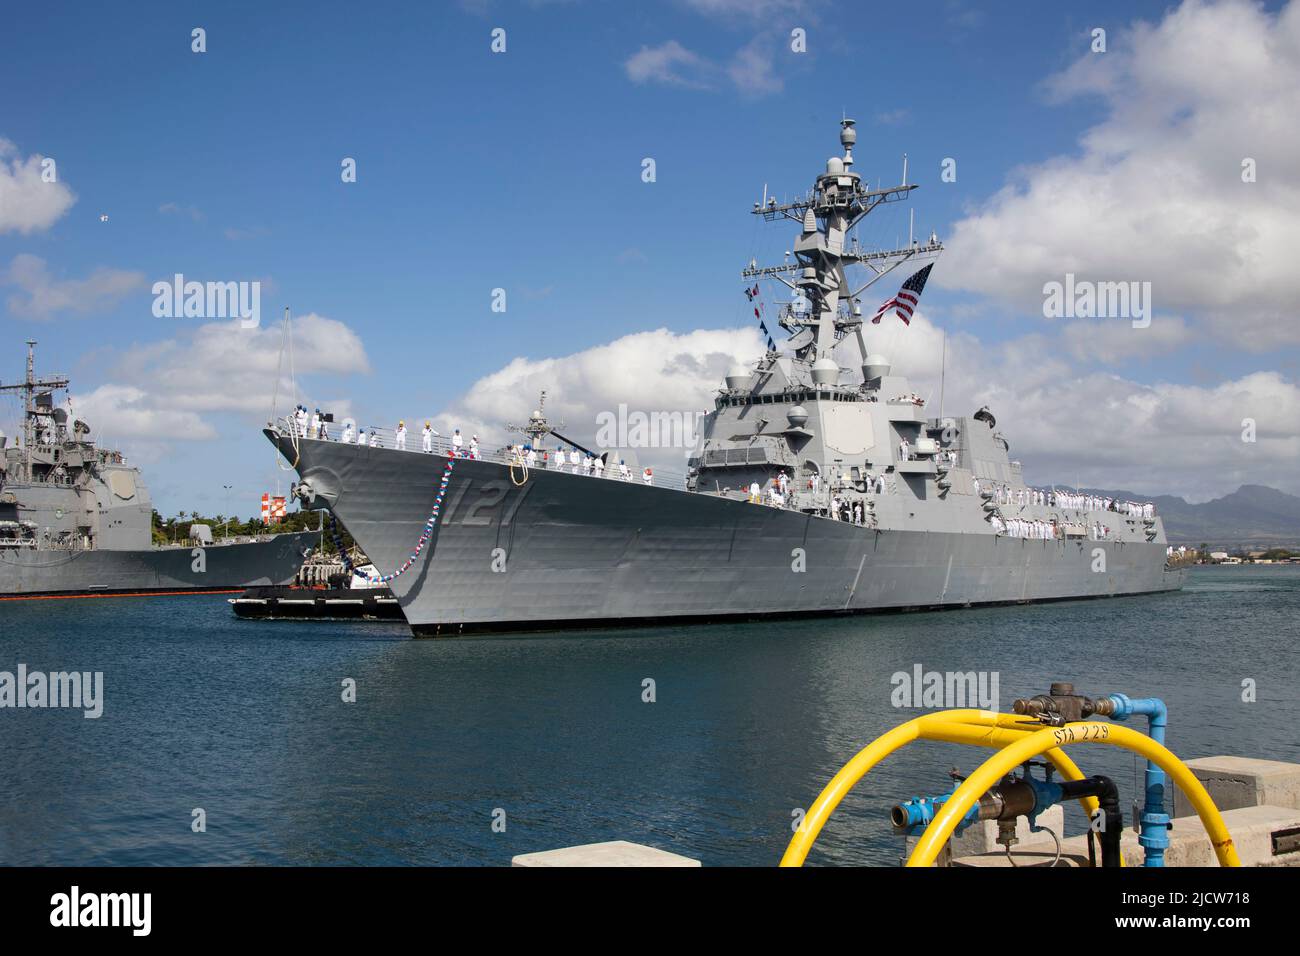 The Arleigh Burke-class guided-missile destroyer USS Frank E. Petersen, Jr. (DDG 121) approaches the pier for its homecoming ceremony at Joint Base Pearl Harbor-Hickam, Hawaii, June 13, 2022. The USS Frank E. Petersen, Jr. is named after retired U.S. Marine Corps Lt. Gen. Frank E. Petersen, Jr., who was the first Black U.S. Marine Corps aviator and the first Black Marine to become a three-star general. Petersen served two combat tours: in Korea in 1953 and in Vietnam in 1968. He flew more than 350 combat missions and had more than 4,000 hours in various fighter and attack aircraft. (U.S. Marin Stock Photo